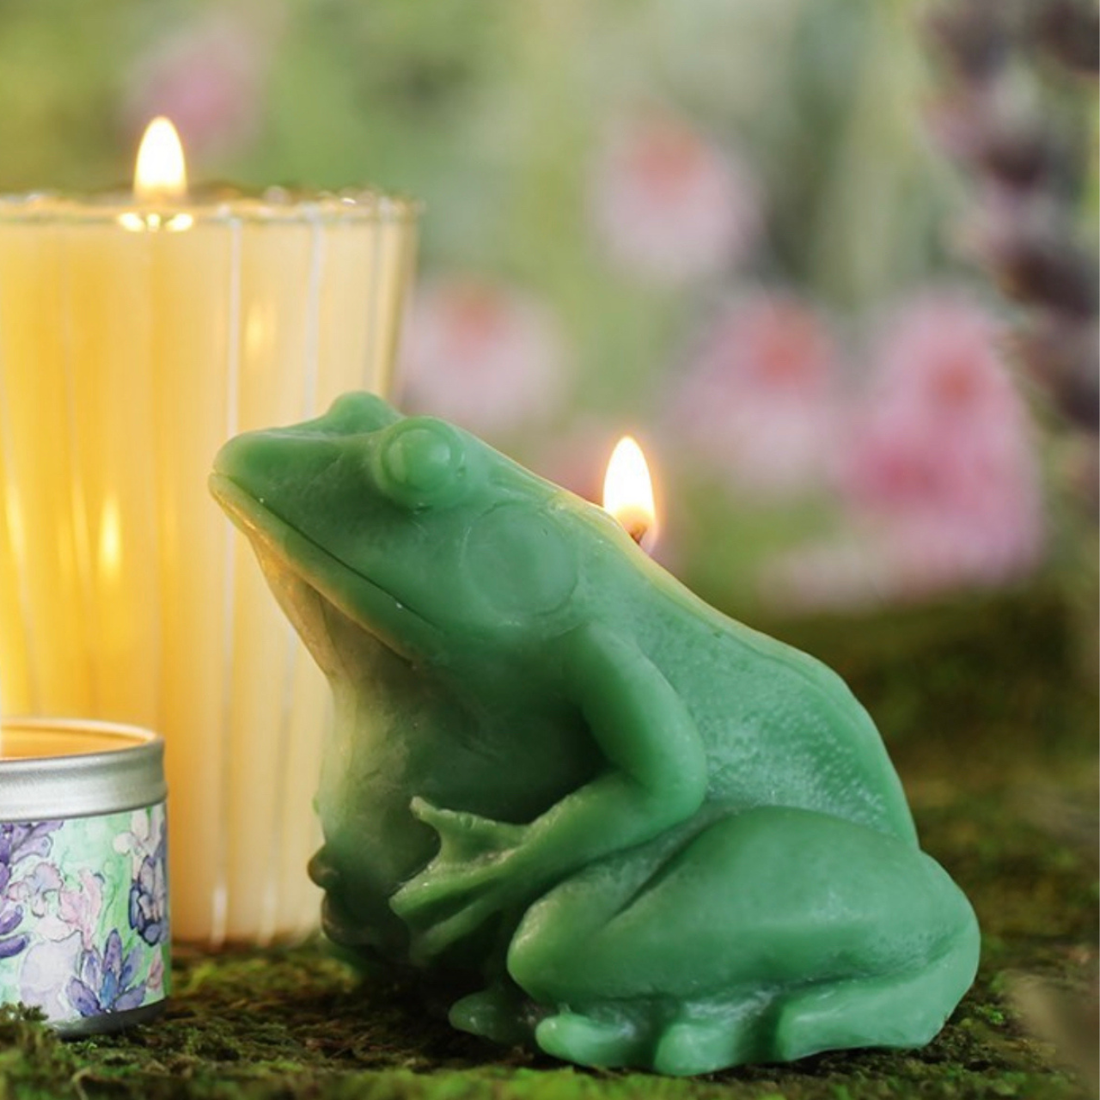 A medium green beeswax candle in the shape of a realistic frog holding its belly. The candle is lit, sitting on a mossy green table with other candles.